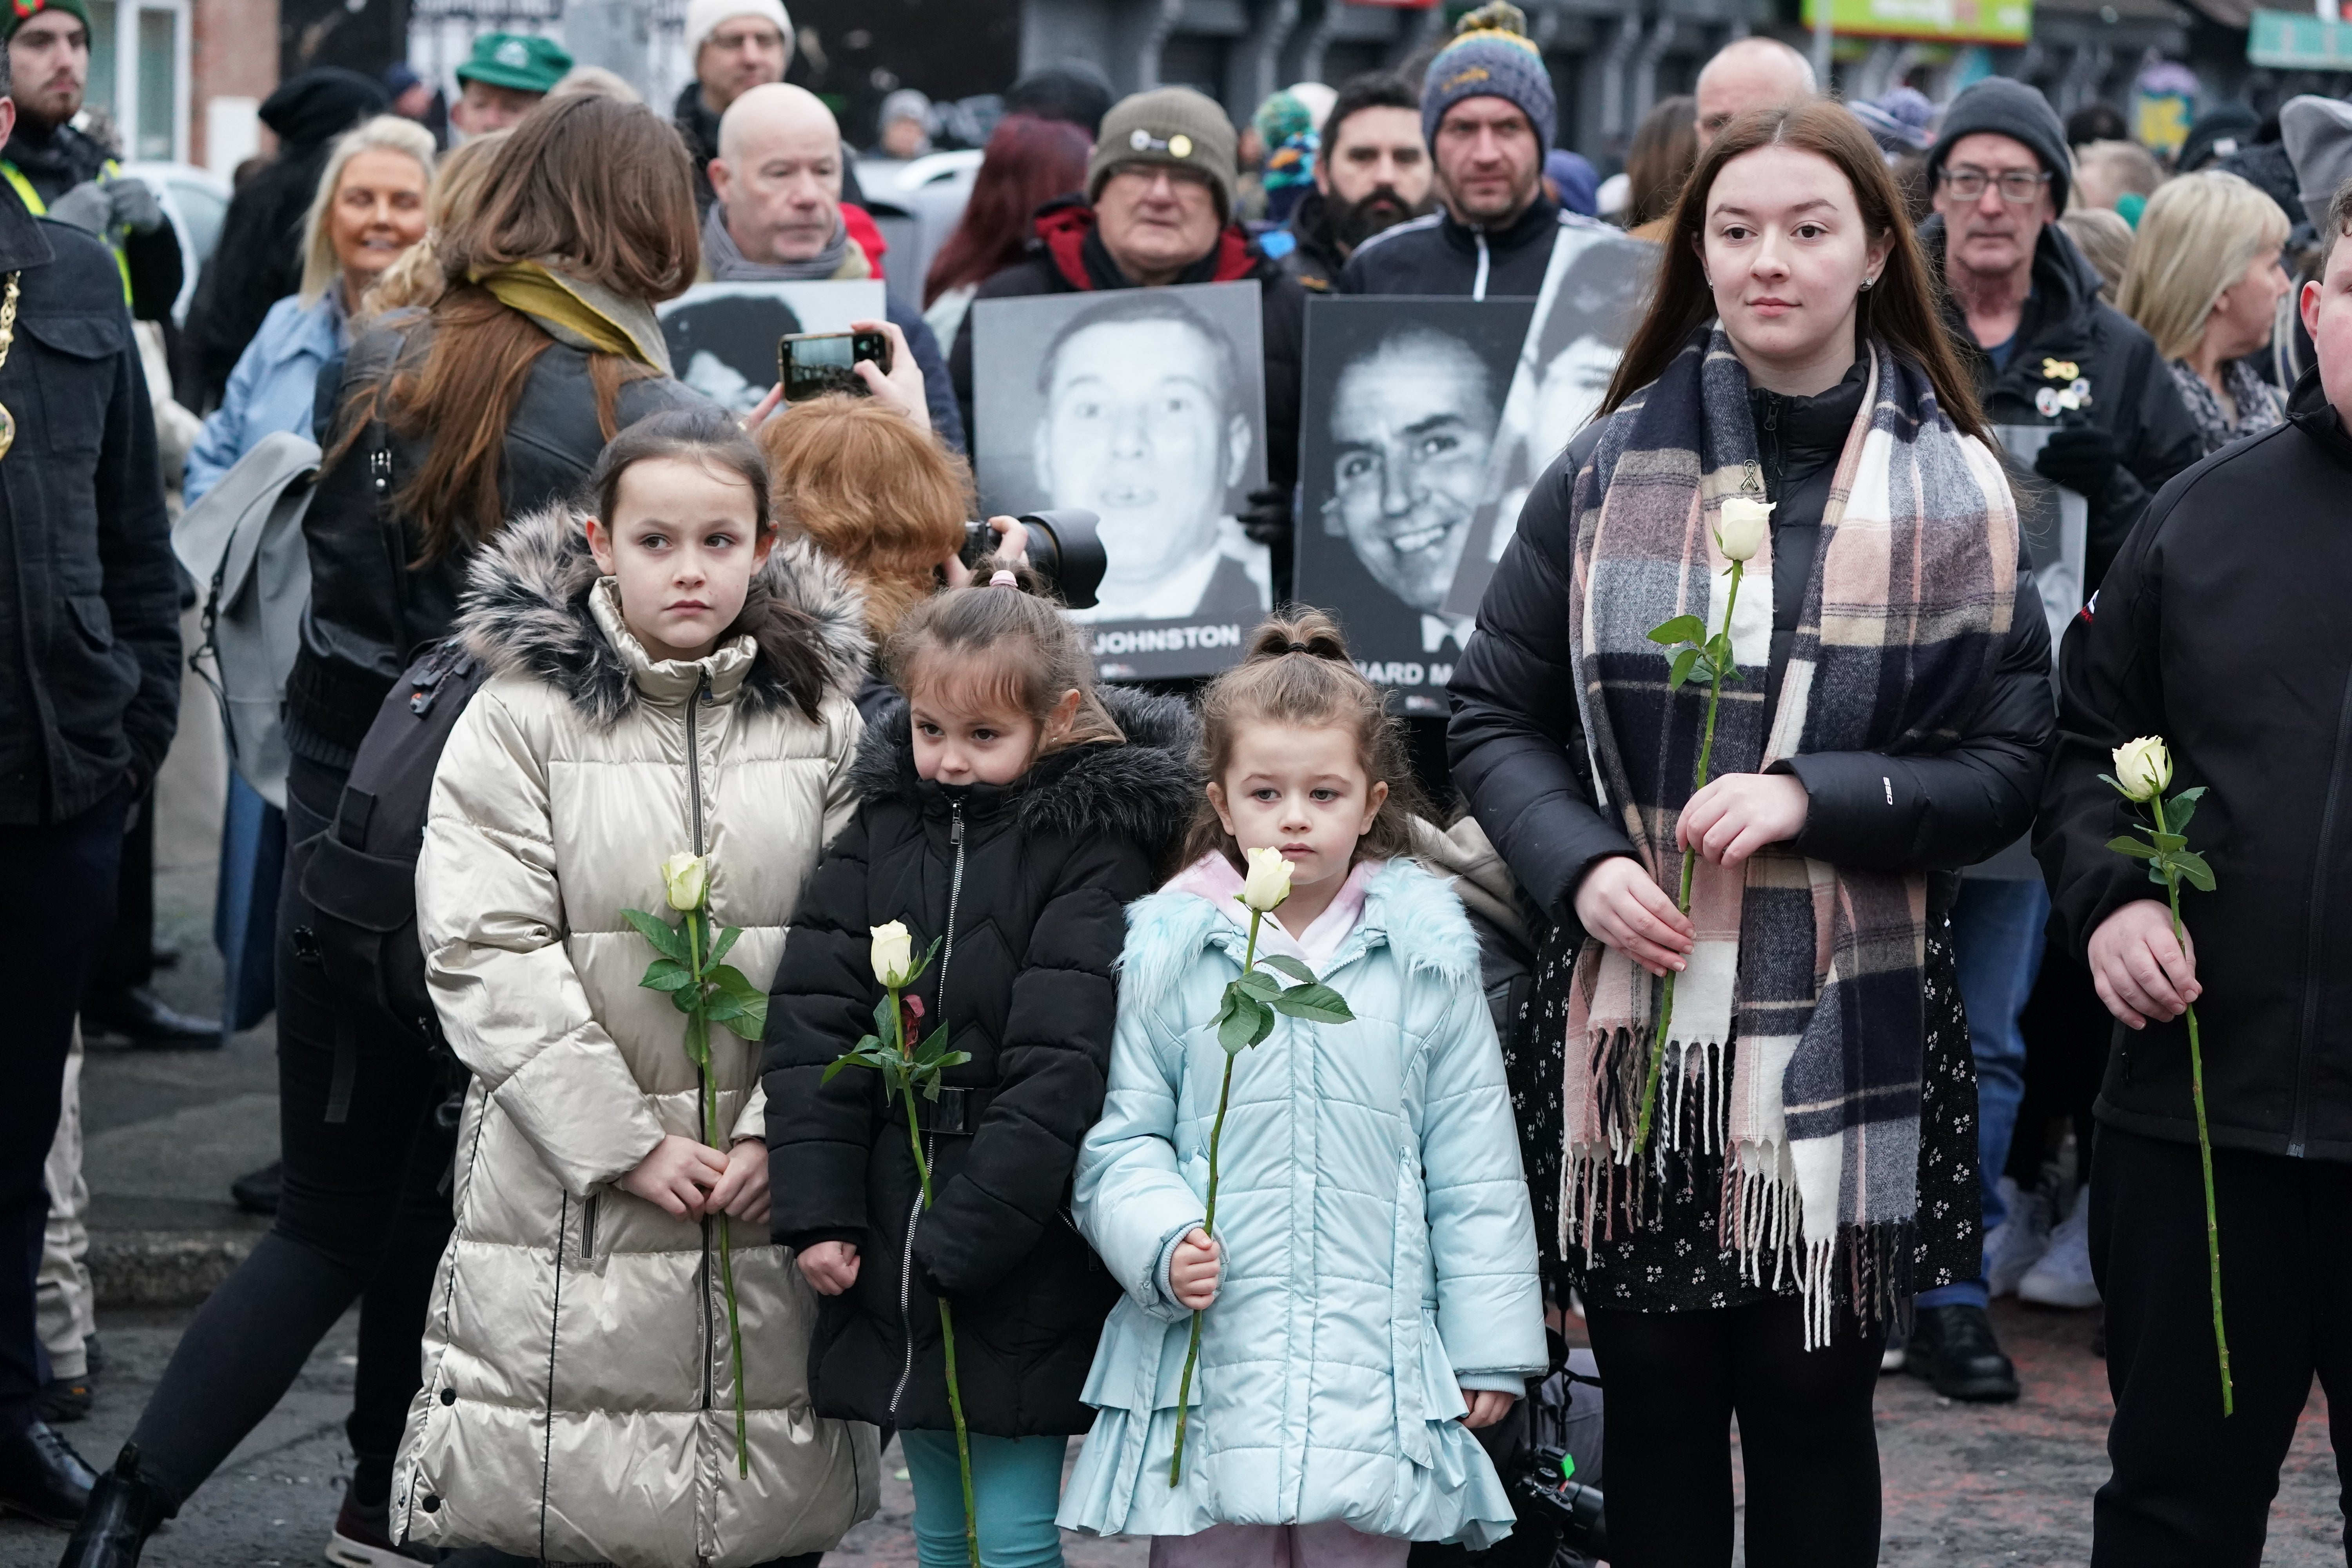 Families in the Creggan area of Derry before the remembrance walk (Brian Lawless/PA)